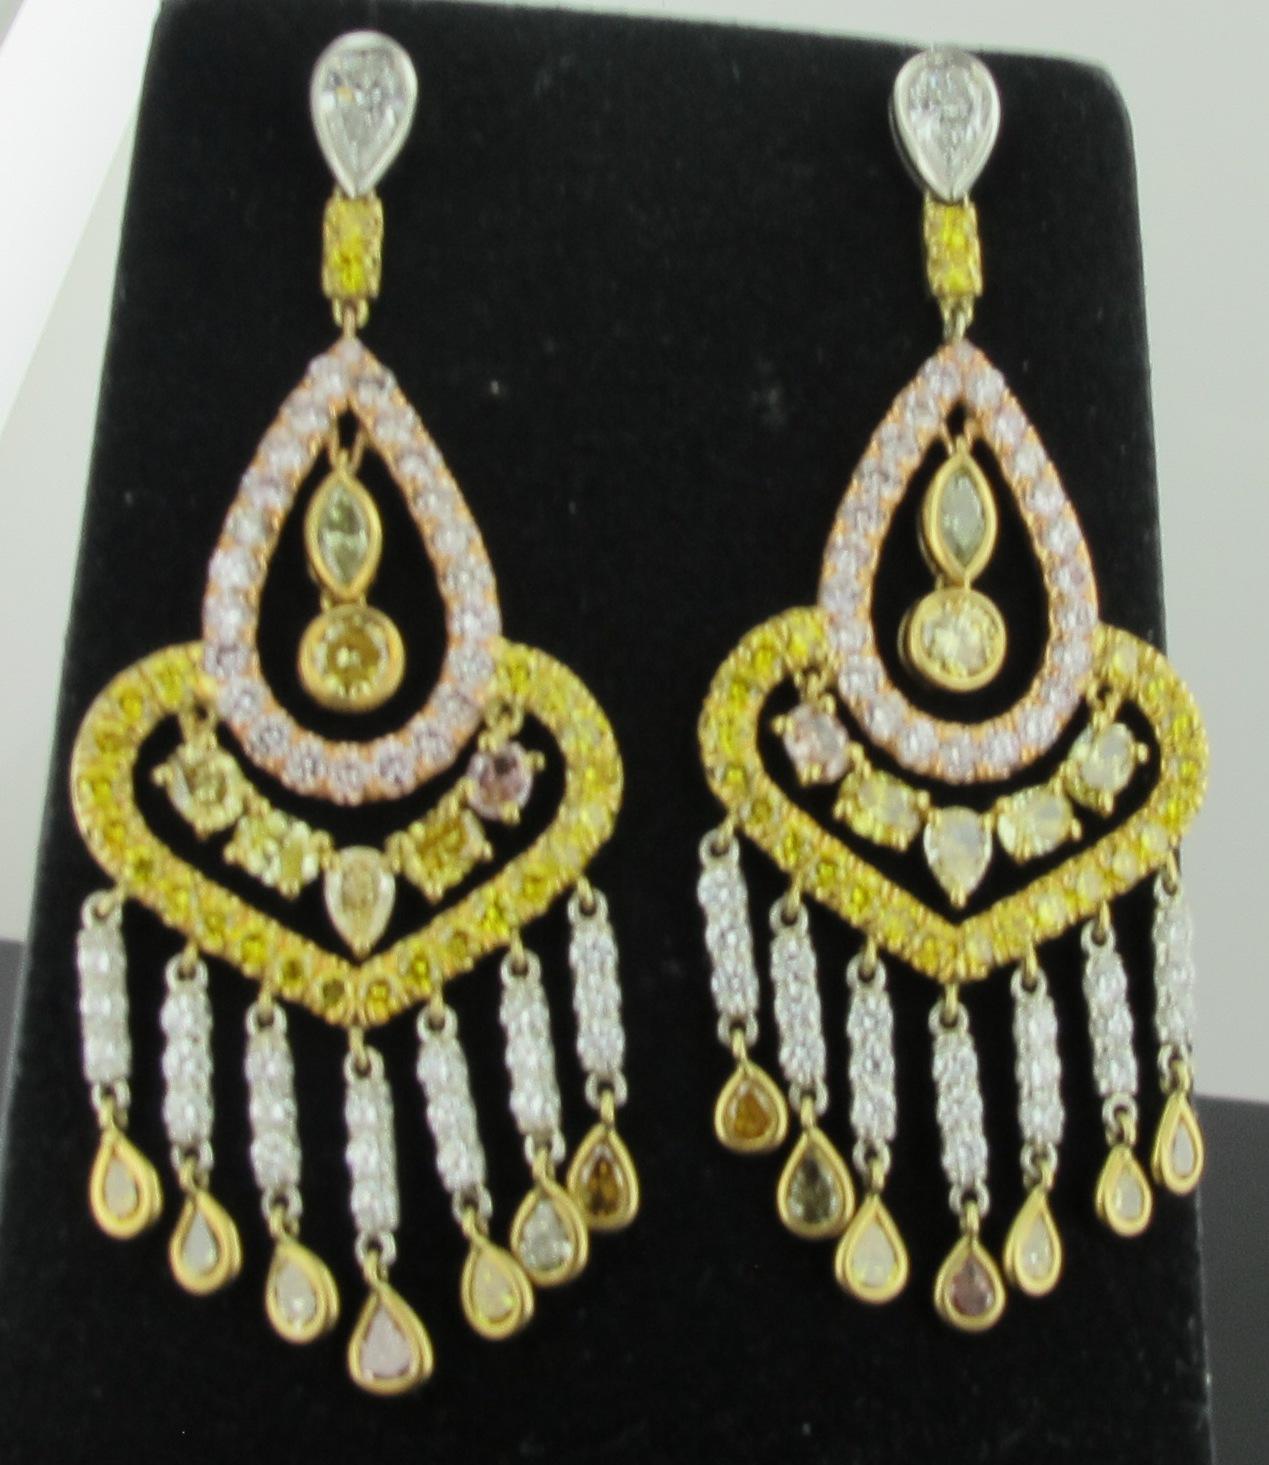 166 Natural colored diamonds in round brilliant, oval, marquise and pear shapes.  Natural Pink, yellow and white stones in a dangle drop style. Total weight is 8.82 carats.  18kt white, yellow and rose gold. 